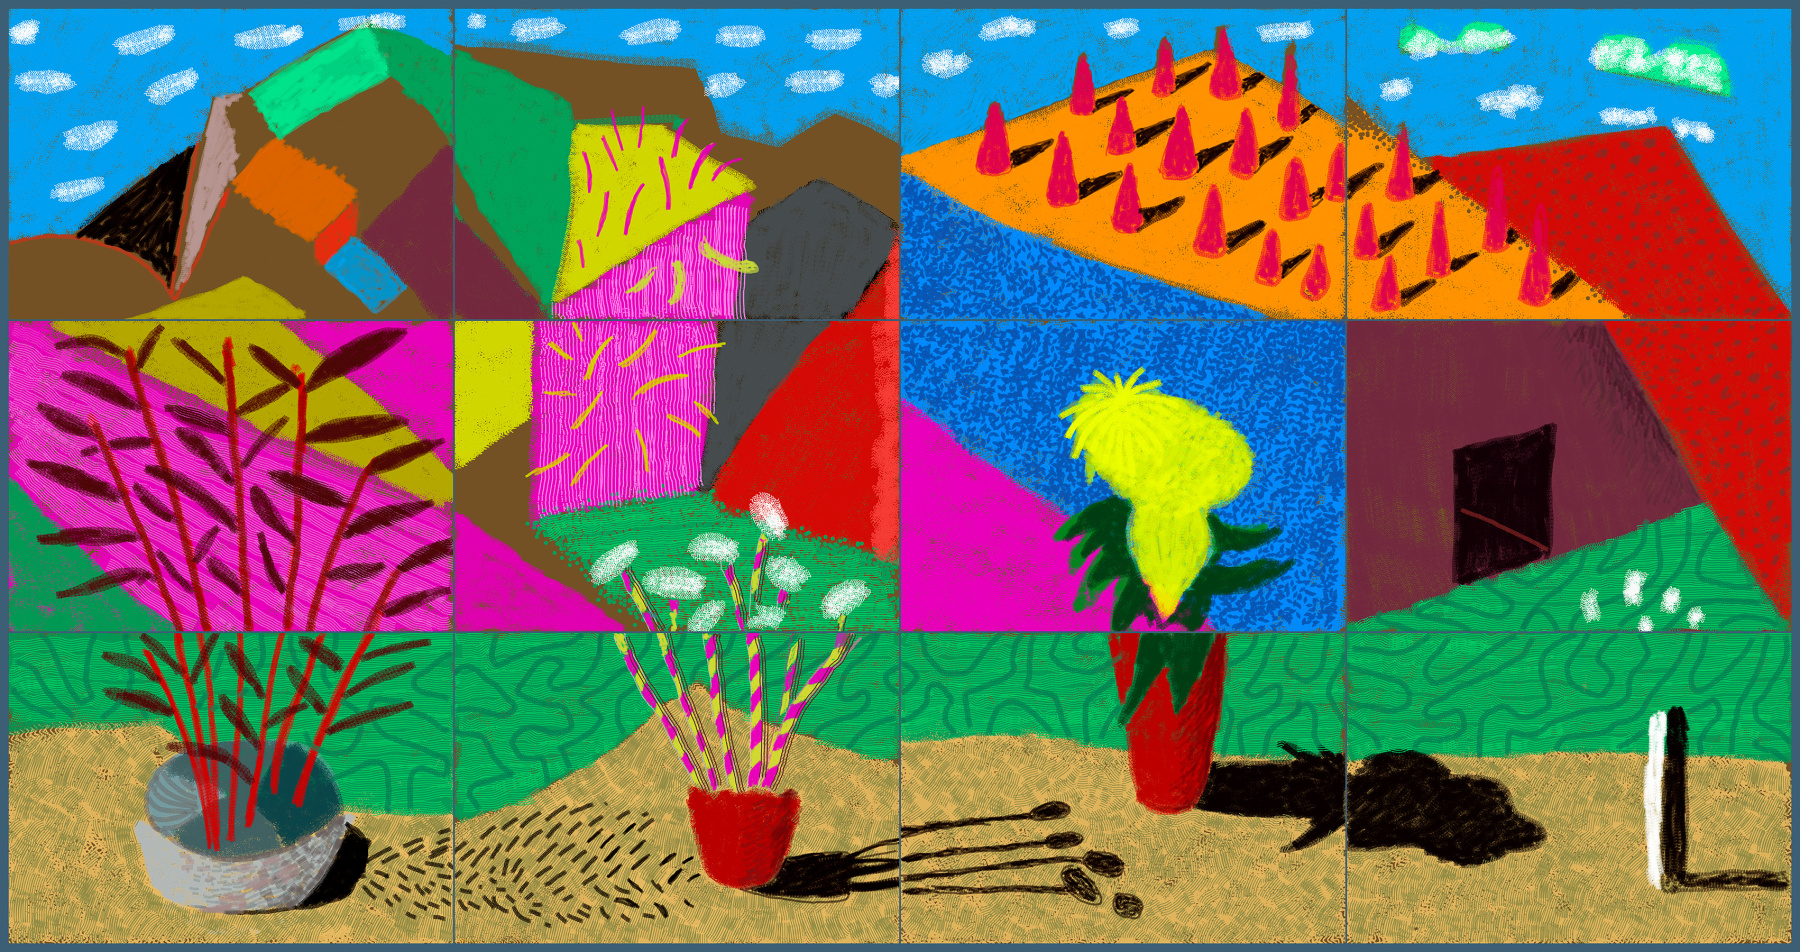 David Hockney&amp;nbsp;
&amp;quot;August 2021, Landscape with Shadows&amp;quot;&amp;nbsp;
Twelve iPad paintings comprising a single work, printed on paper, mounted on Dibond&amp;nbsp;
Edition of 25&amp;nbsp;
108.2 x 205 cm (42.5 x 80.75 Inches)&amp;nbsp;
&amp;copy; David Hockney